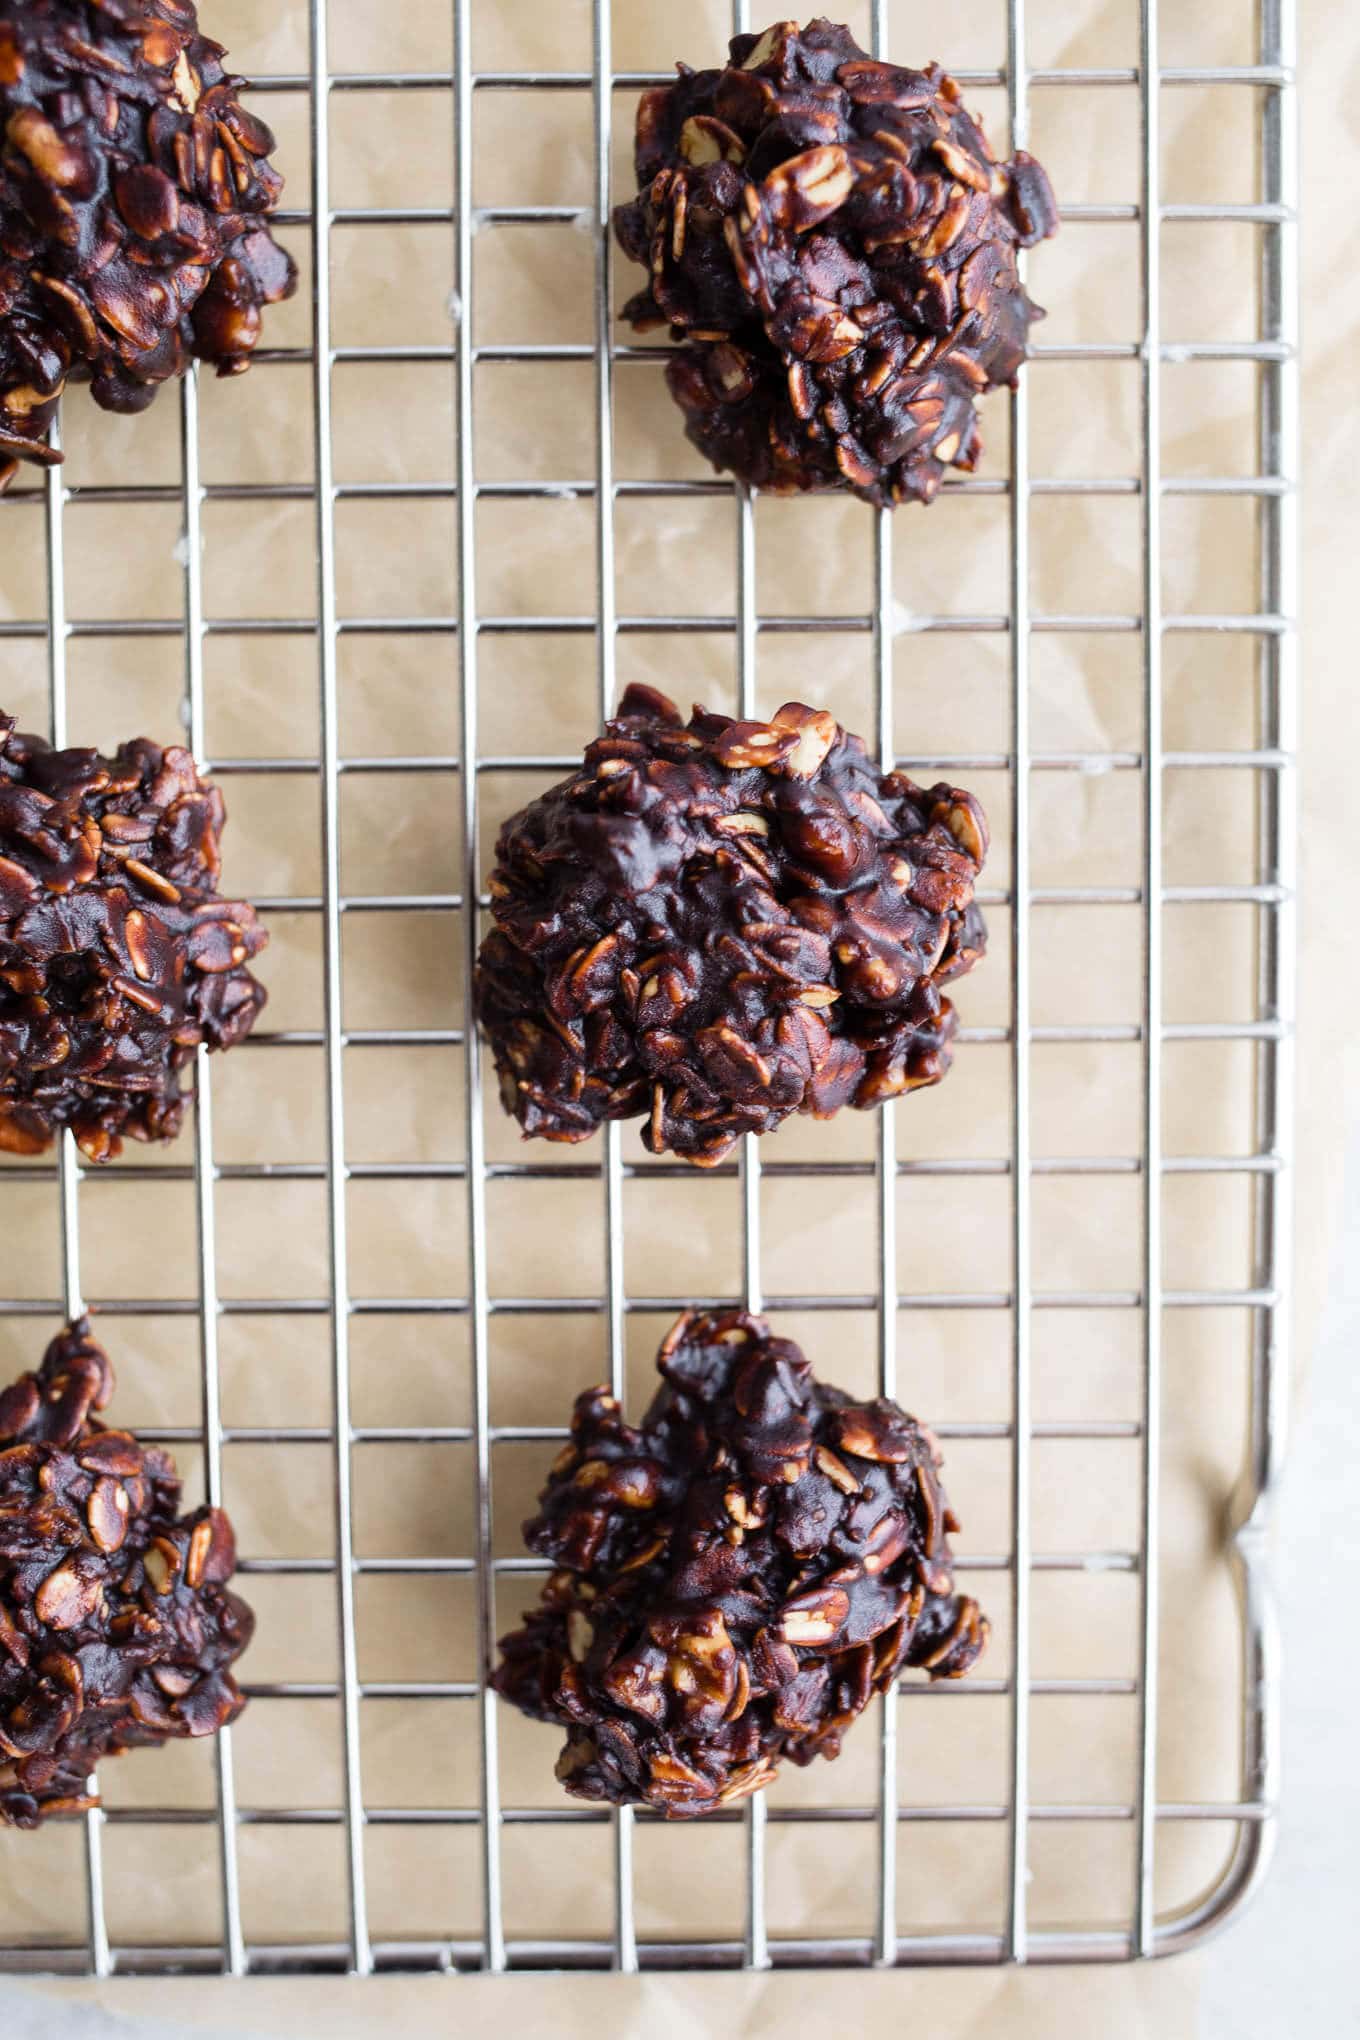 Chocolate Oatmeal No Bake Cookies are made with coconut, gluten-free oats, cocoa powder, walnuts, and sweetened with coconut sugar. A healthy no bake cookie recipe that is gluten-free and vegan. #glutenfree